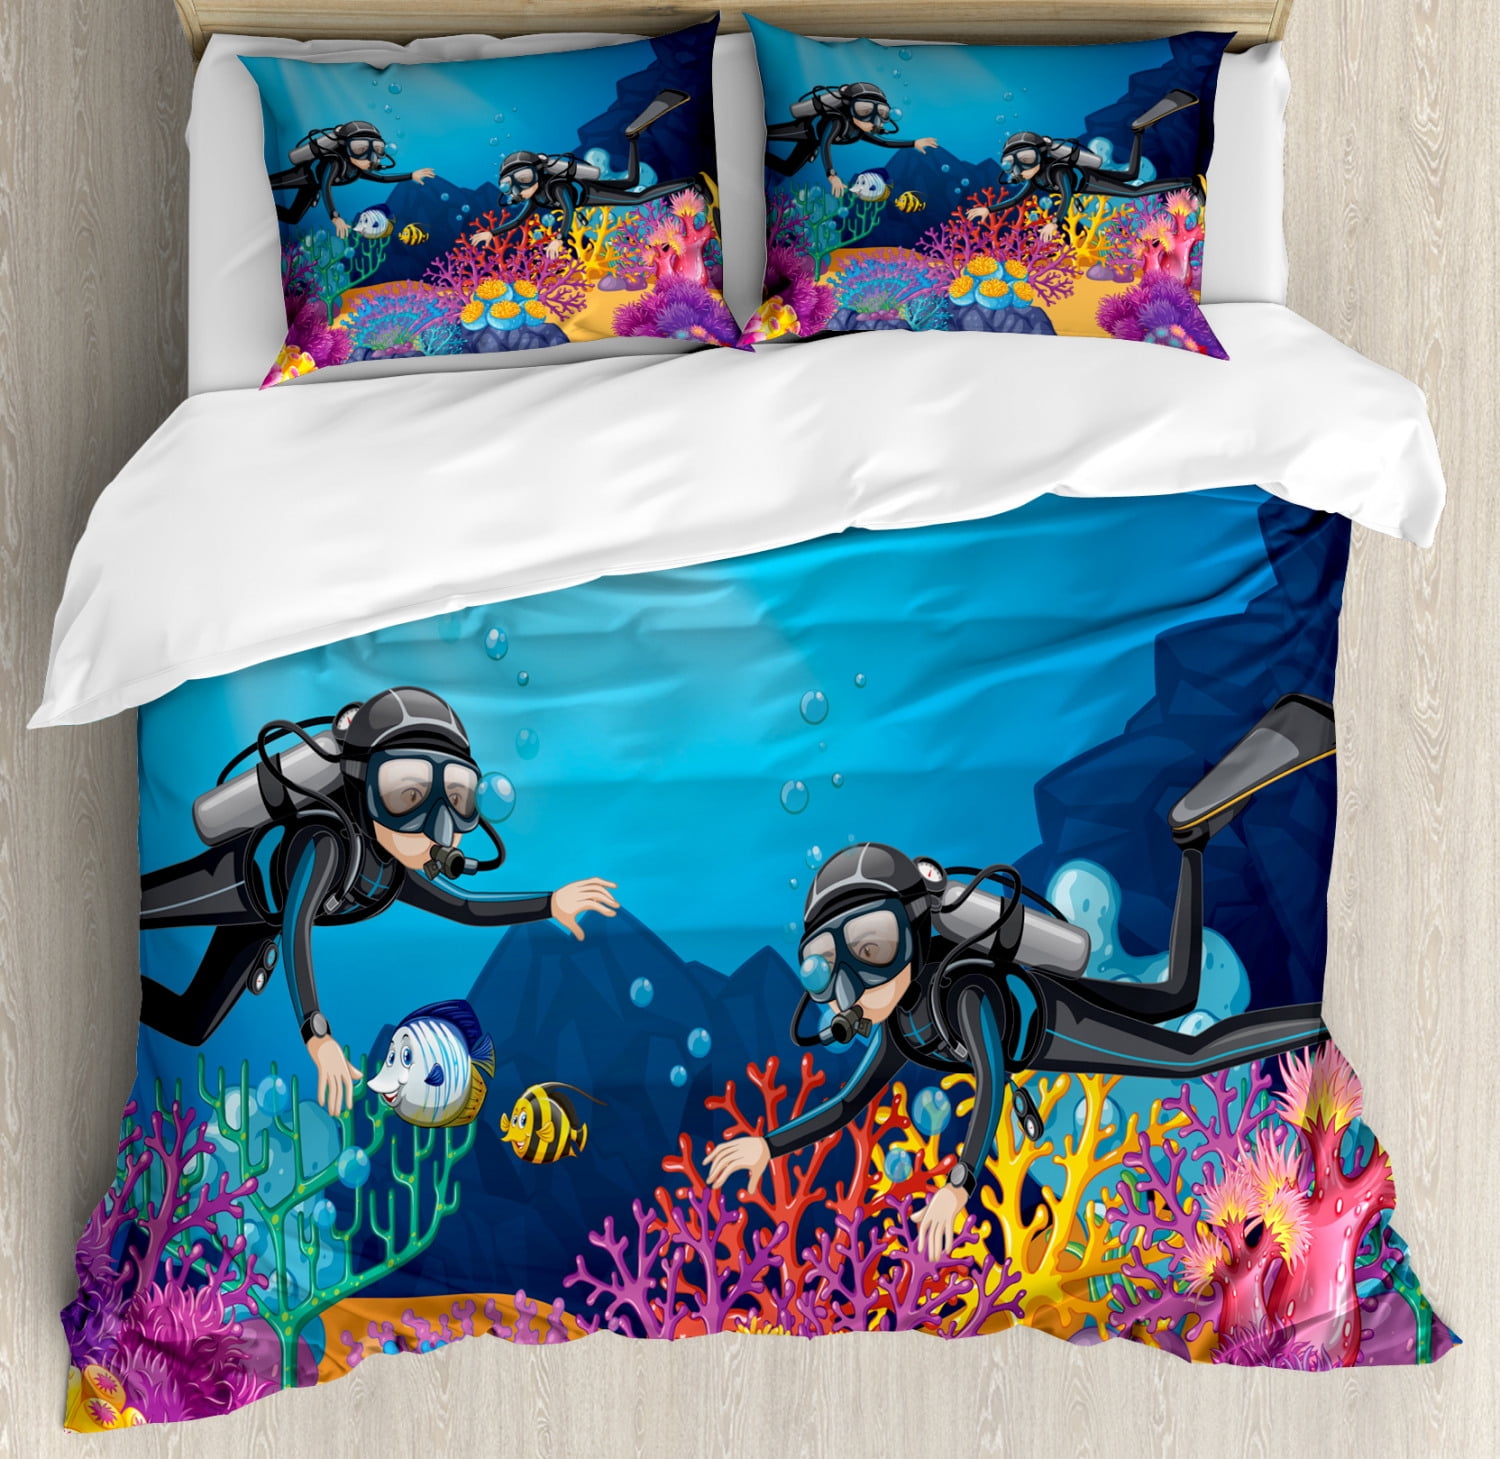 Twin Size Navy Blue 2 Piece Decorative Quilted Bedspread Set with 1 Pillow Sham Ocean Animals Shells Plants Seahorse Turtle Fishing Theme Art Print Ambesonne Under The Sea Coverlet 